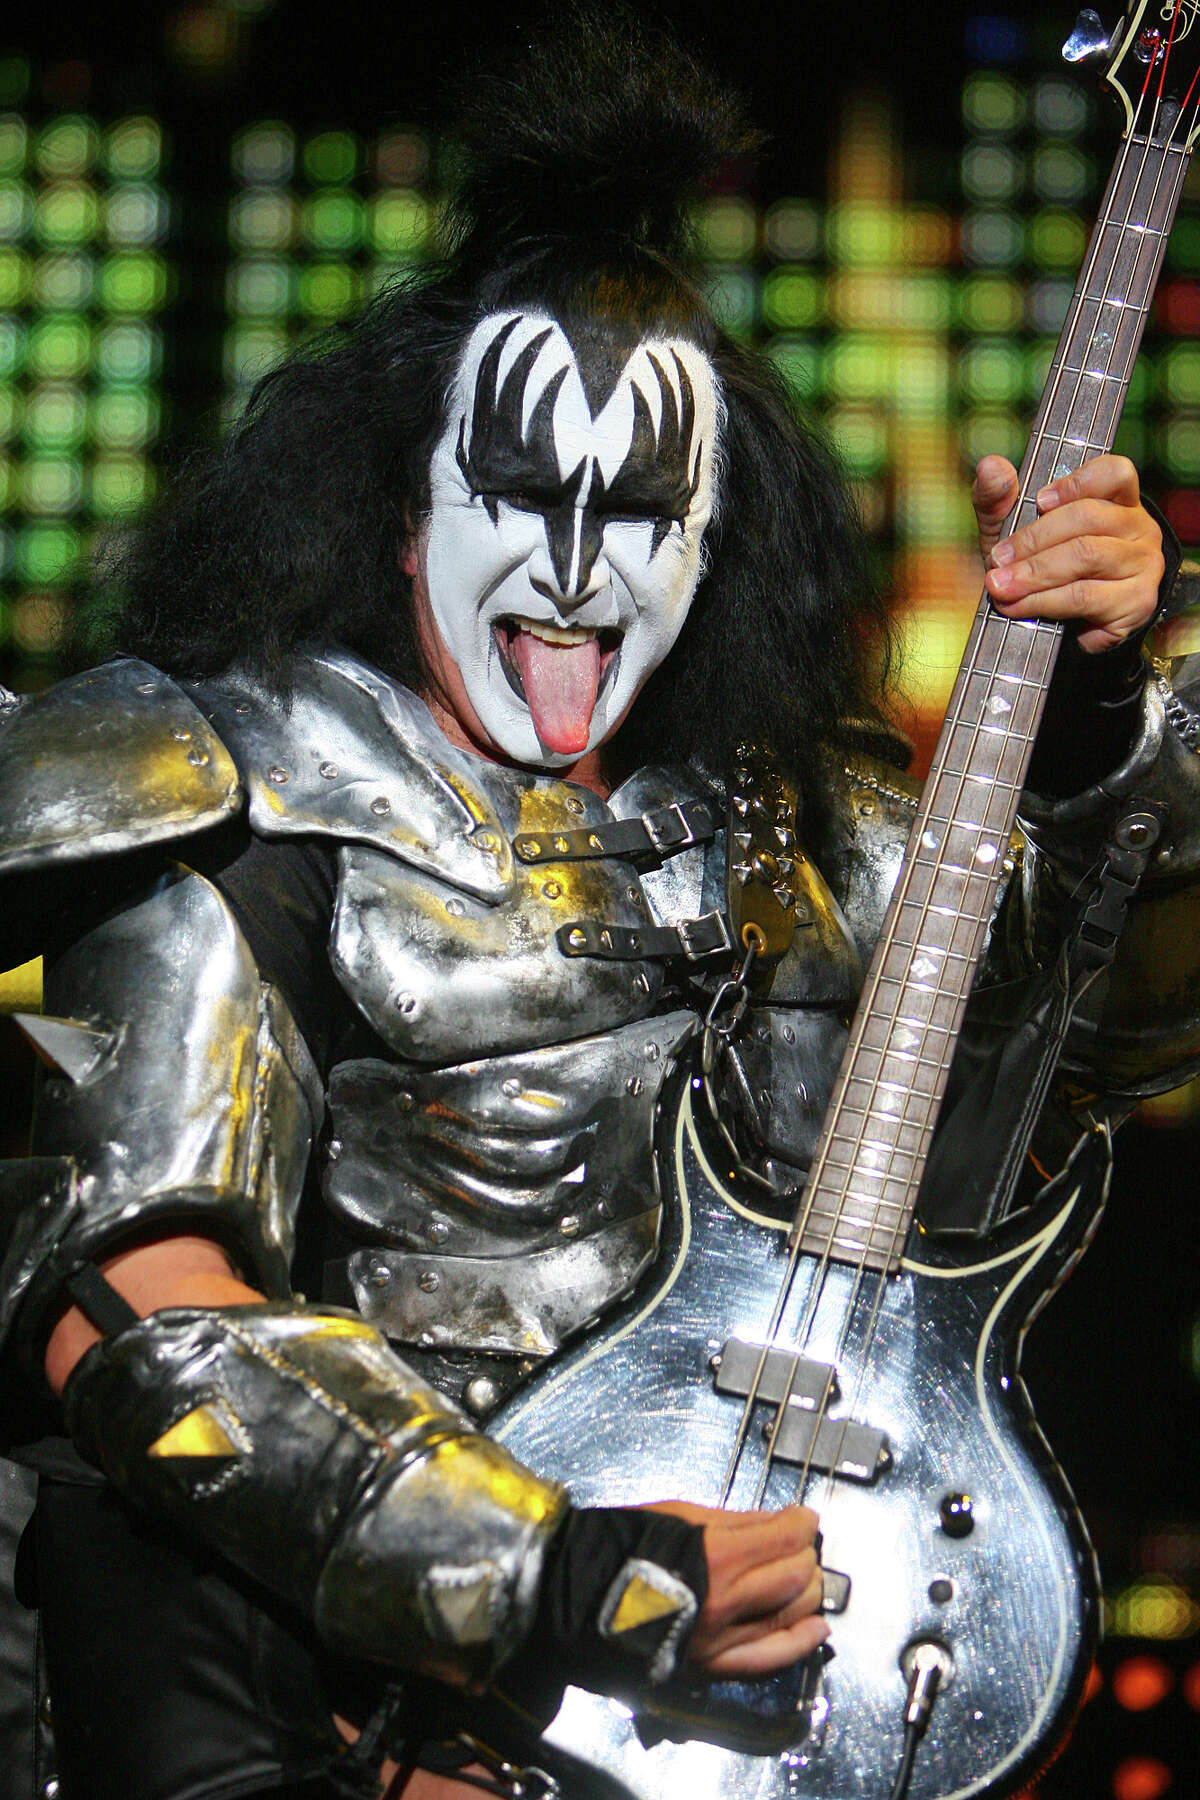 Gene Simmons shows his famous tongue during the KISS concert at the AT&T Center, September 19, 2010. (JENNIFER WHITNEY/ special to the Express-News)